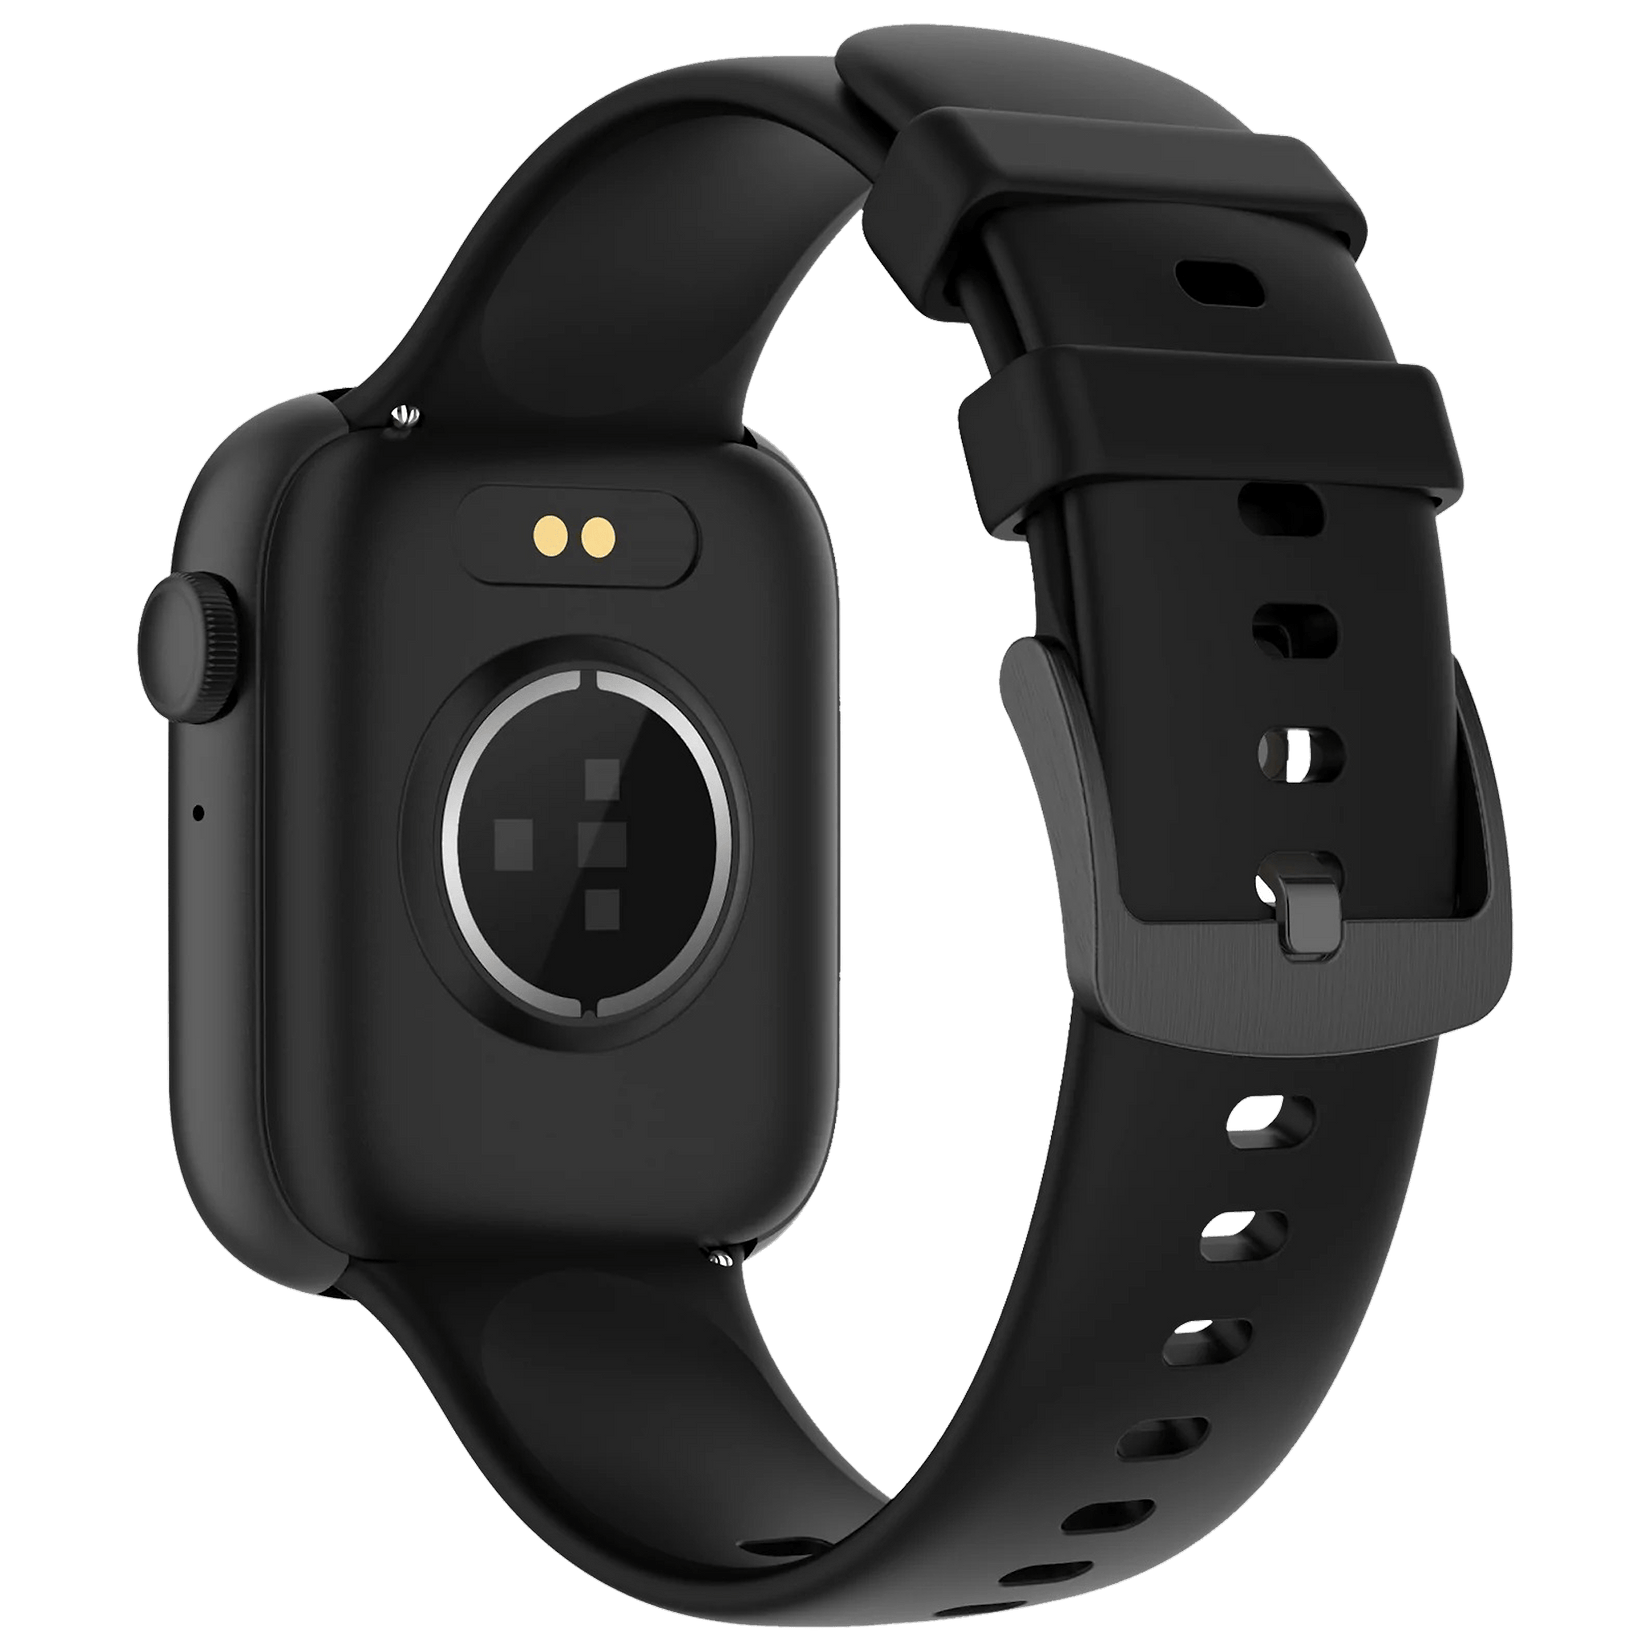 Fire-Boltt Ring 3 Smartwatch with Bluetooth Calling BSW043-BLACK - Kamal Watch Company